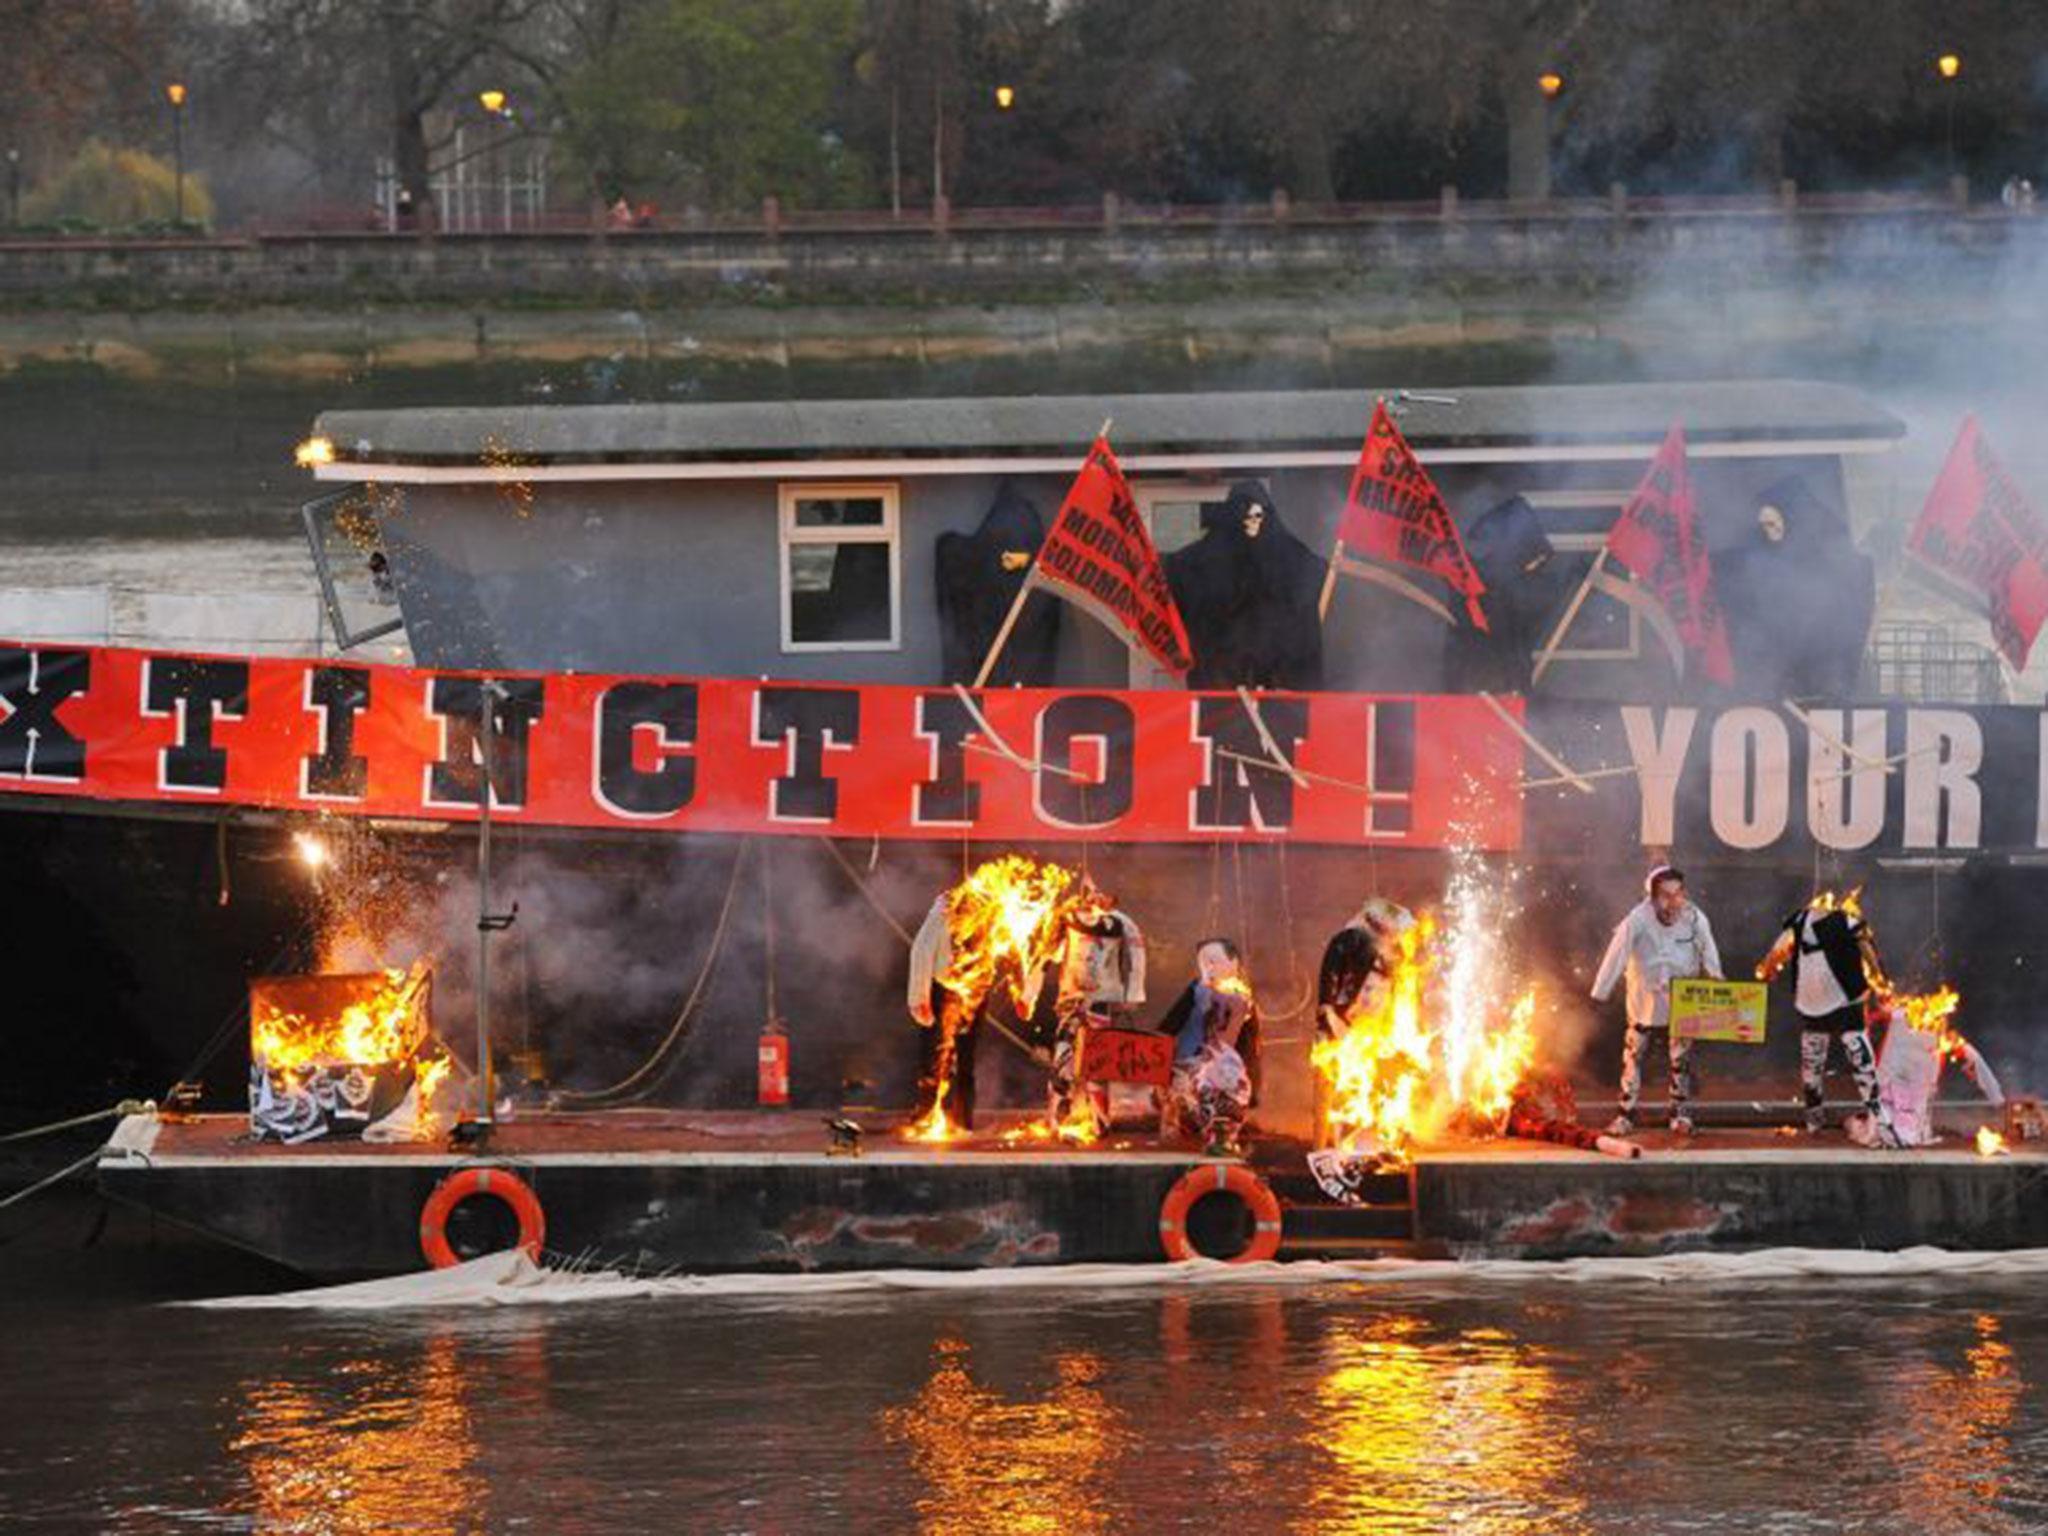 Joe Corre, the son of Vivienne Westwood and Sex Pistols creator Malcolm McLaren, burns his £5 million punk collection on a boat on the River Thames in London